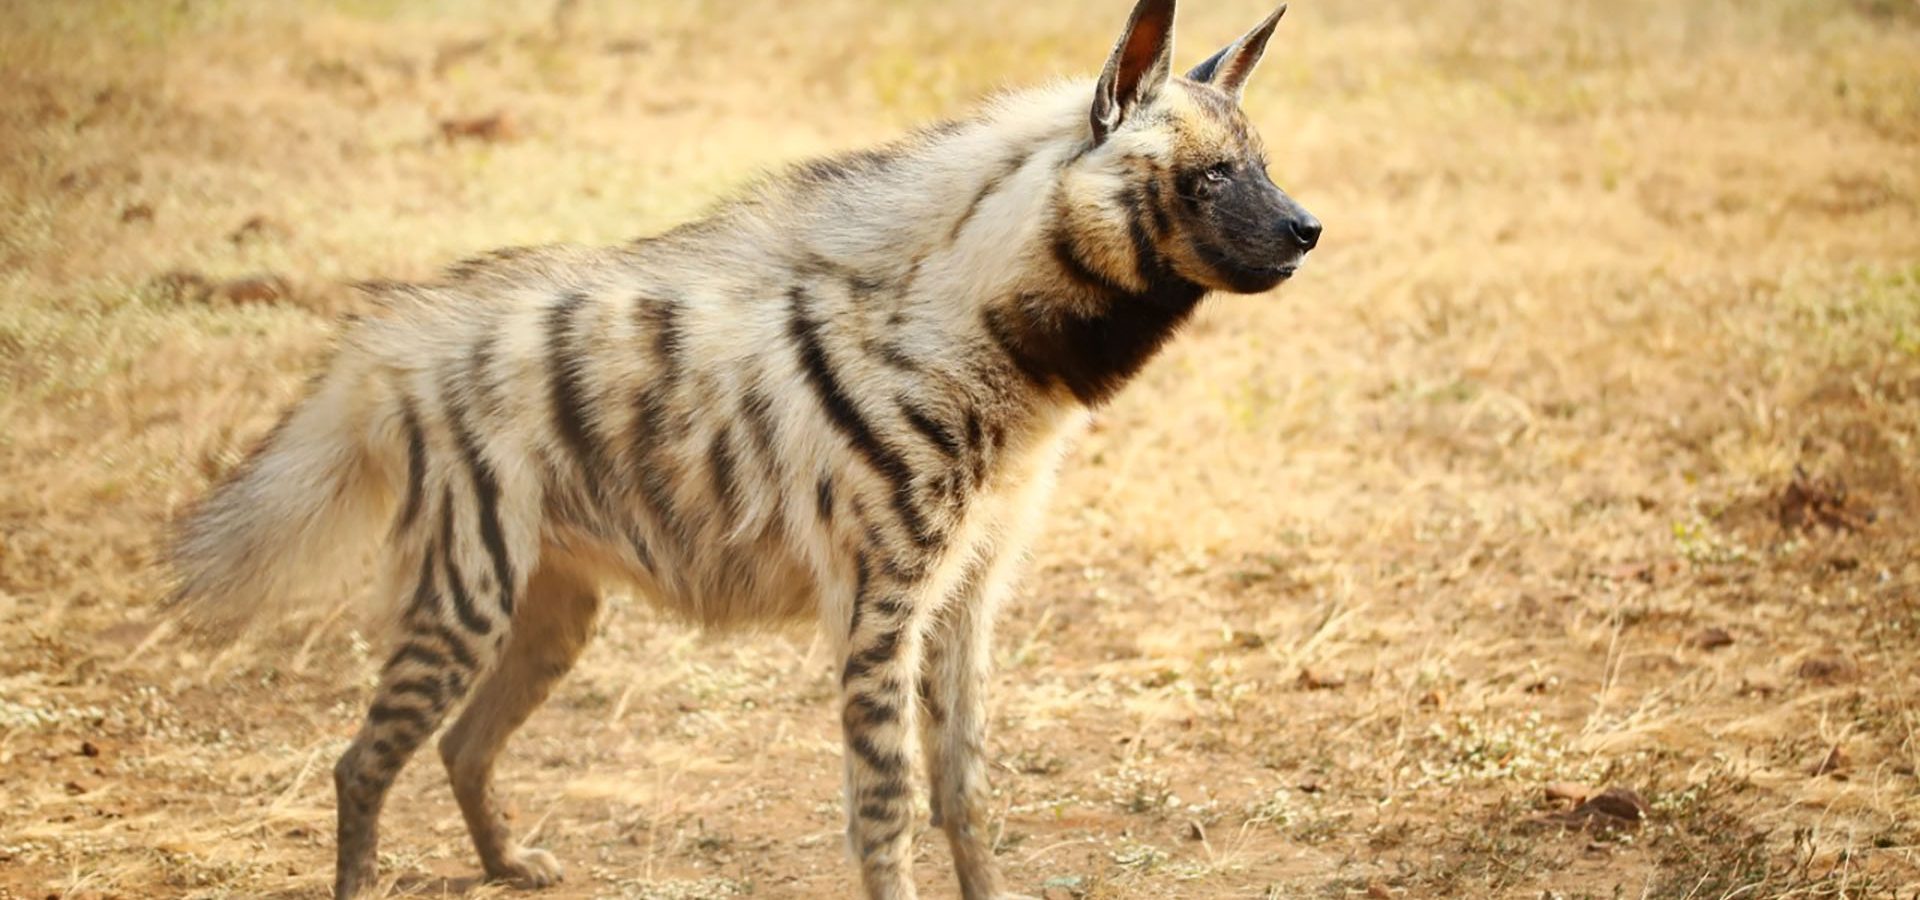 Hyenas Deserve An Image Makeover & Here's Why! - Wildlife SOS